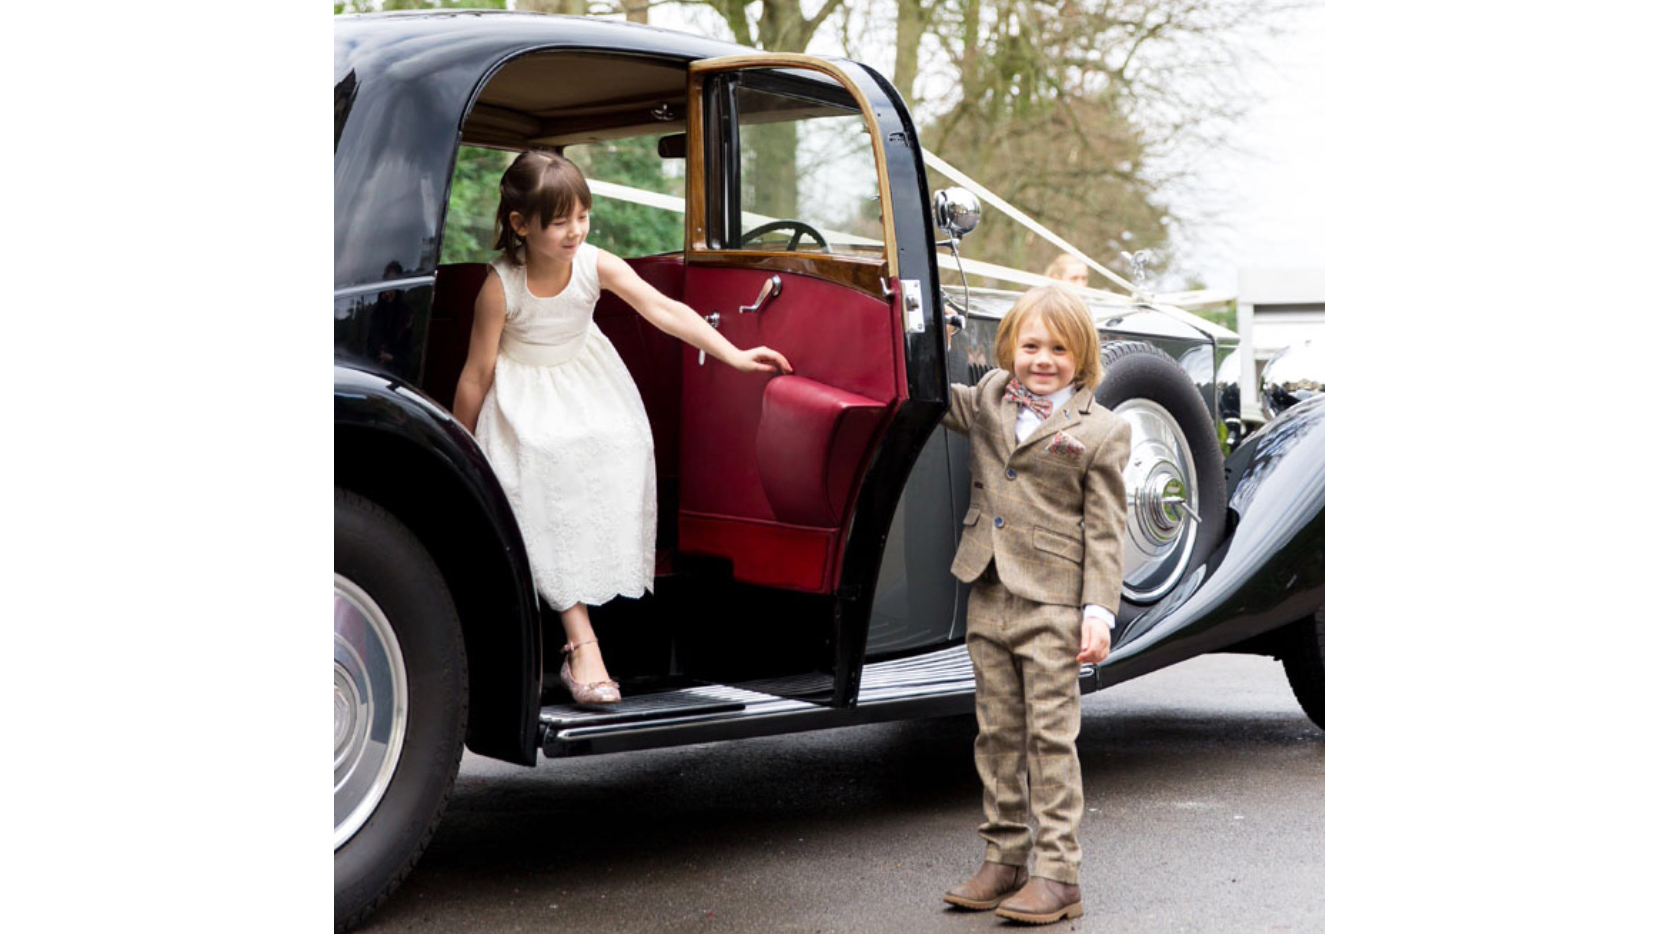 Boy opening the door to the vintage Rolls-Royce to let a little flower girl out of the vehicle